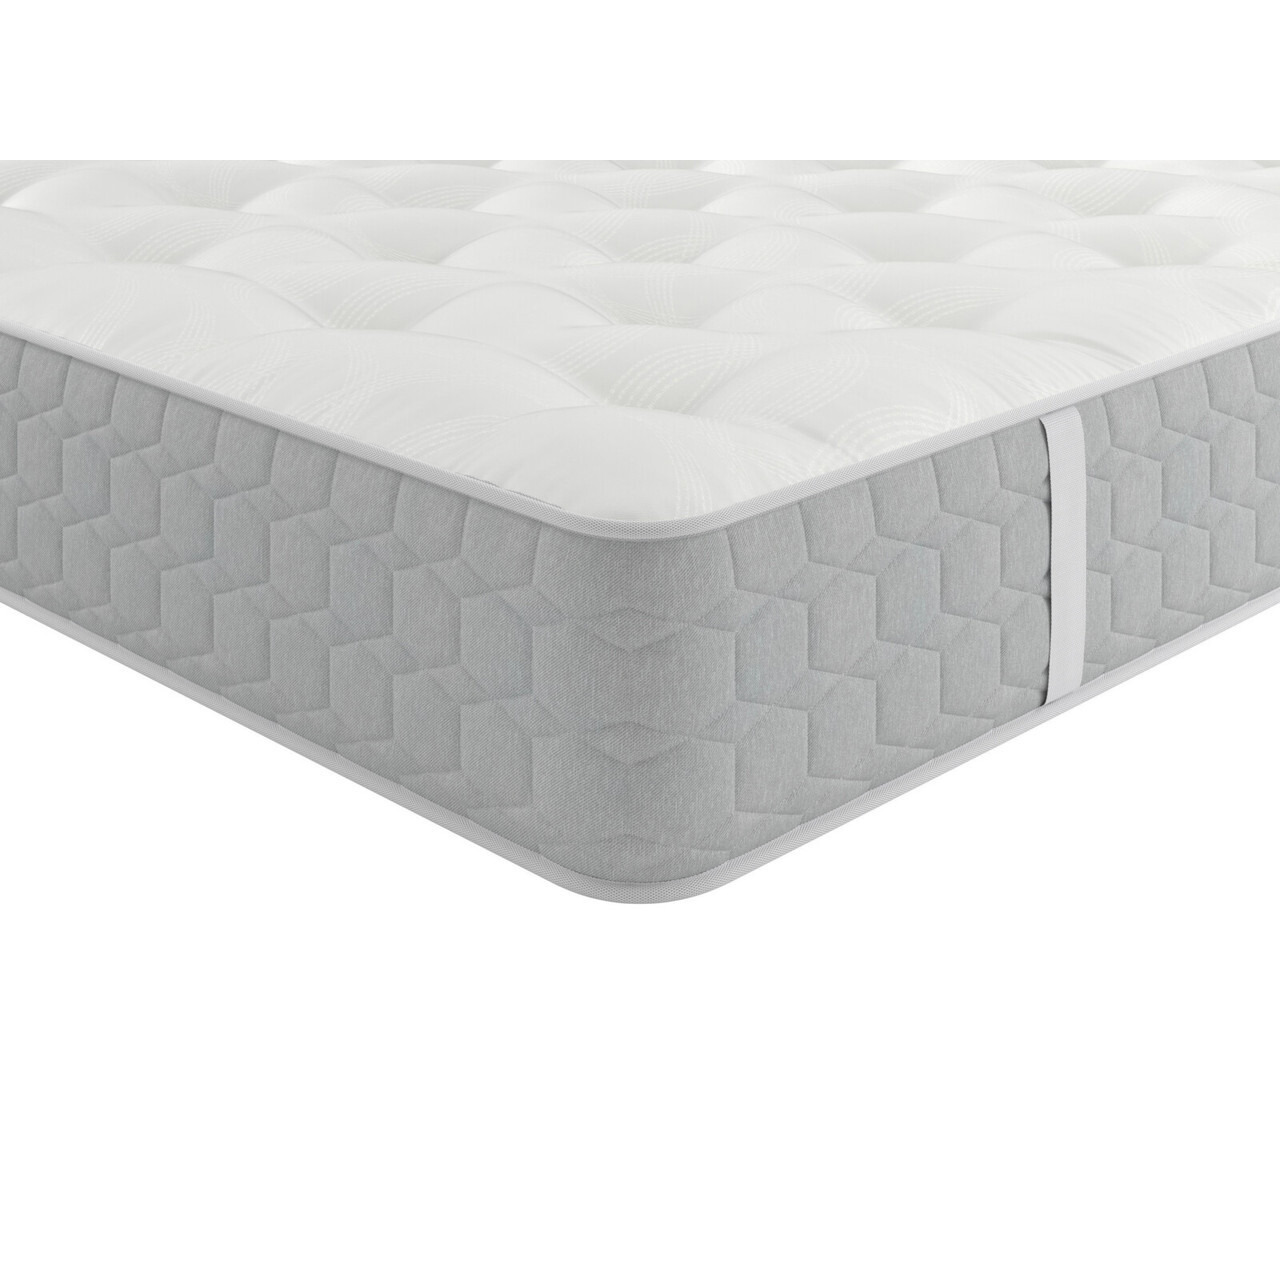 Sealy Brisbane Ortho Firm Support Mattress - image 1